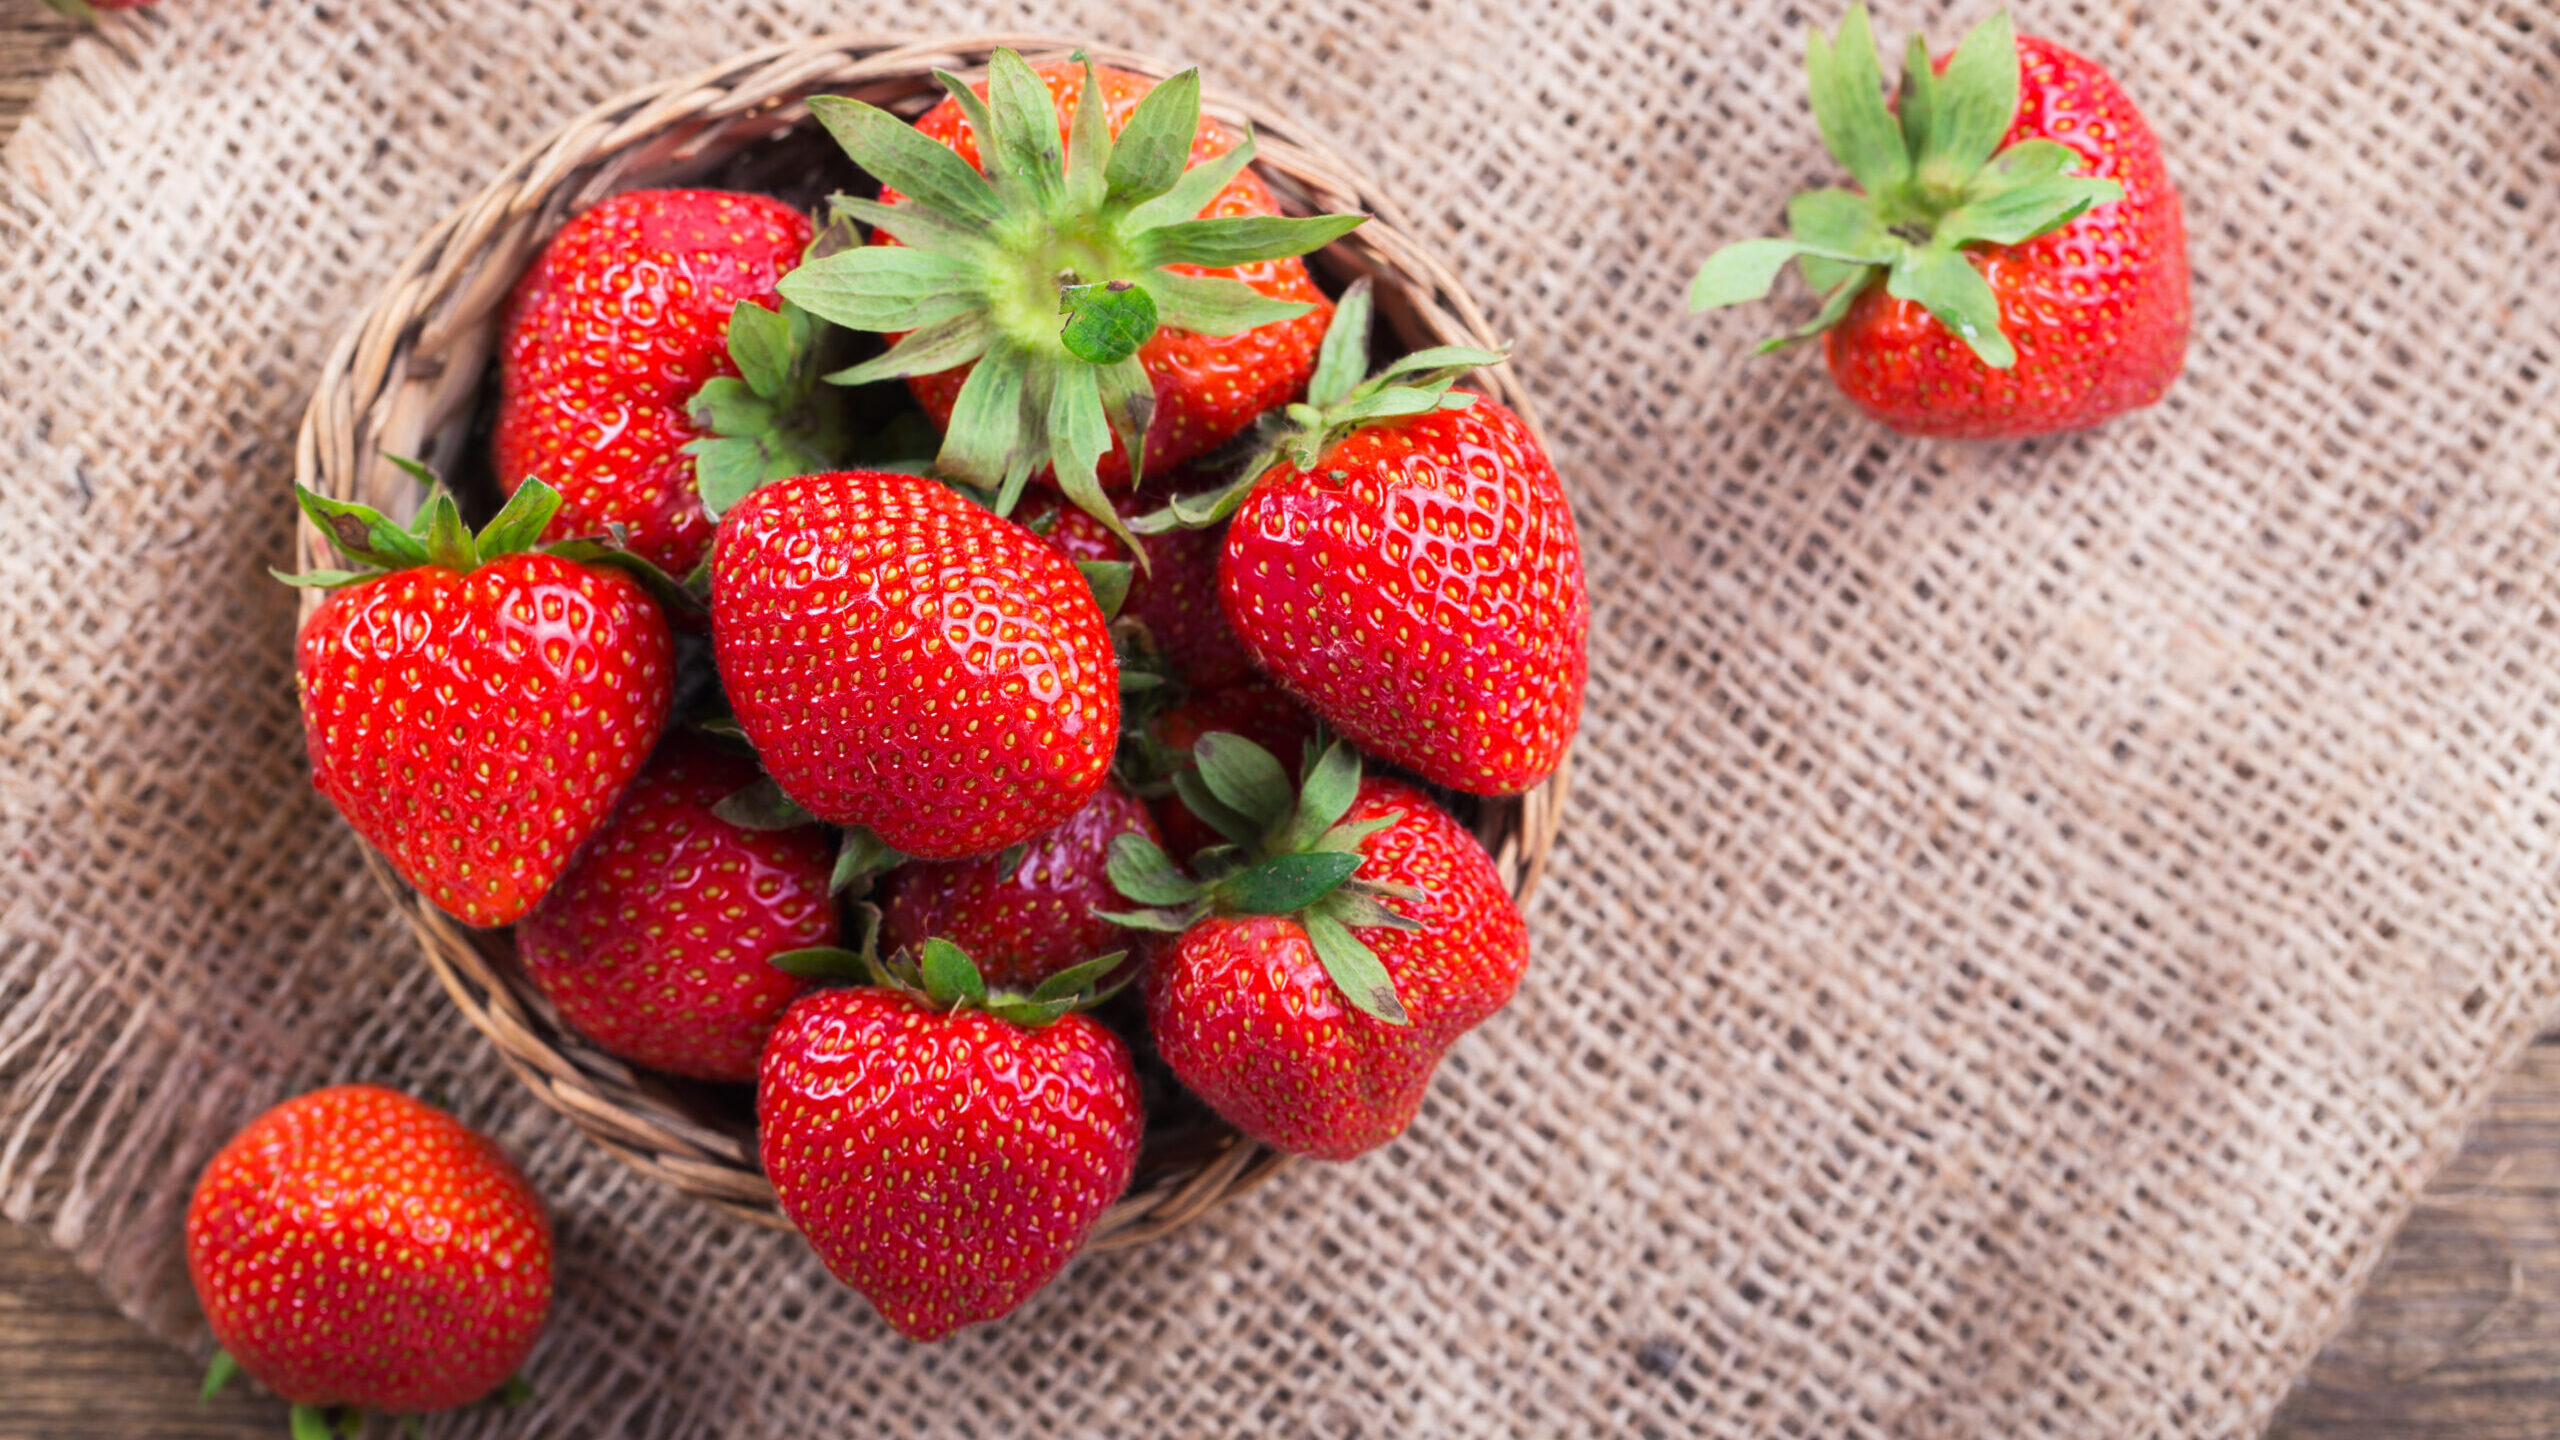 Image for Hepatitis A Outbreak Linked to Strawberries